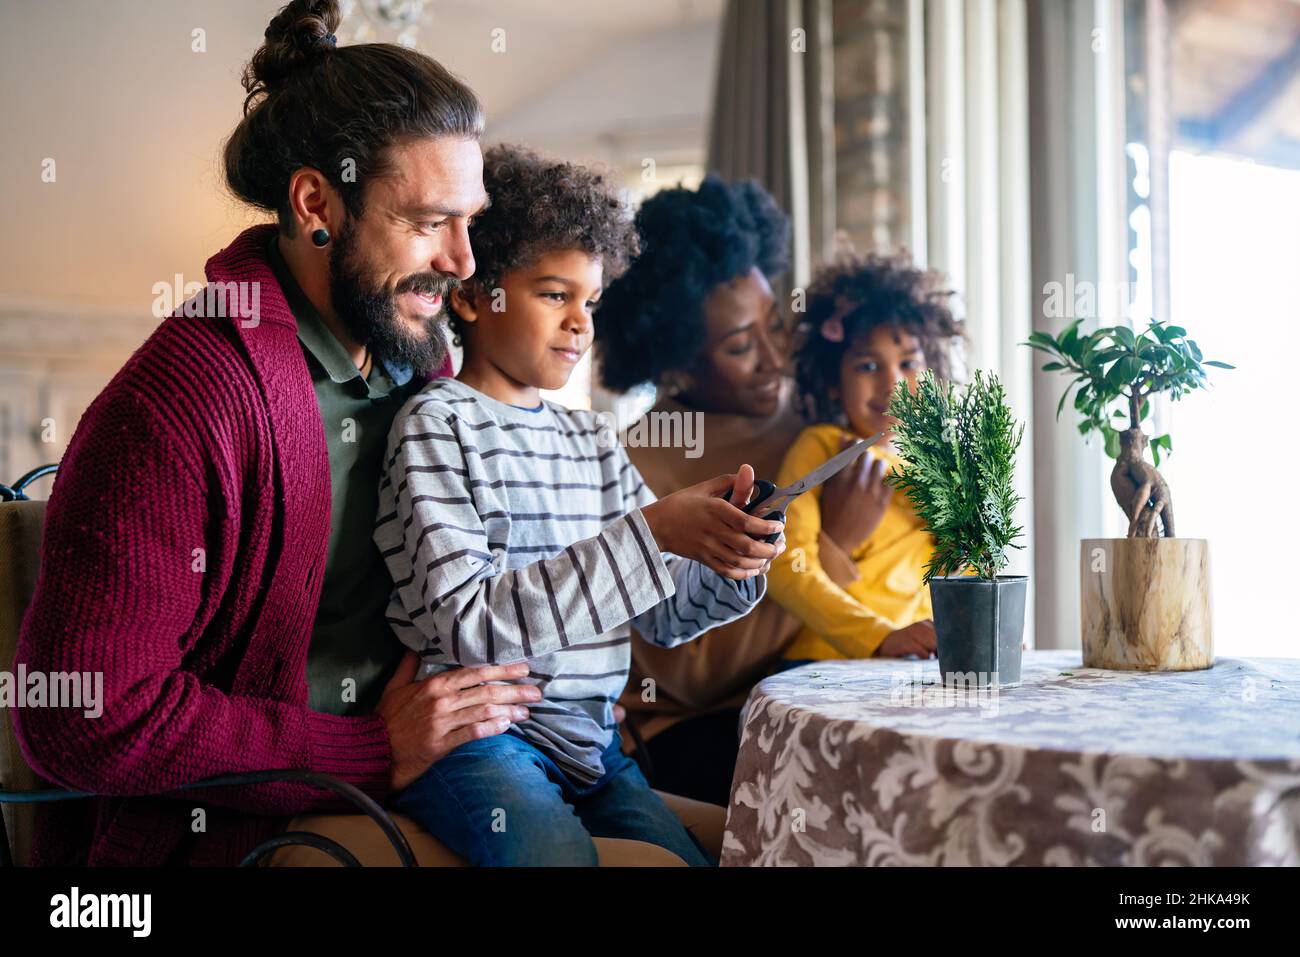 Home hobbies gardening with children and learning botany. Family love happiness concept Stock Photo